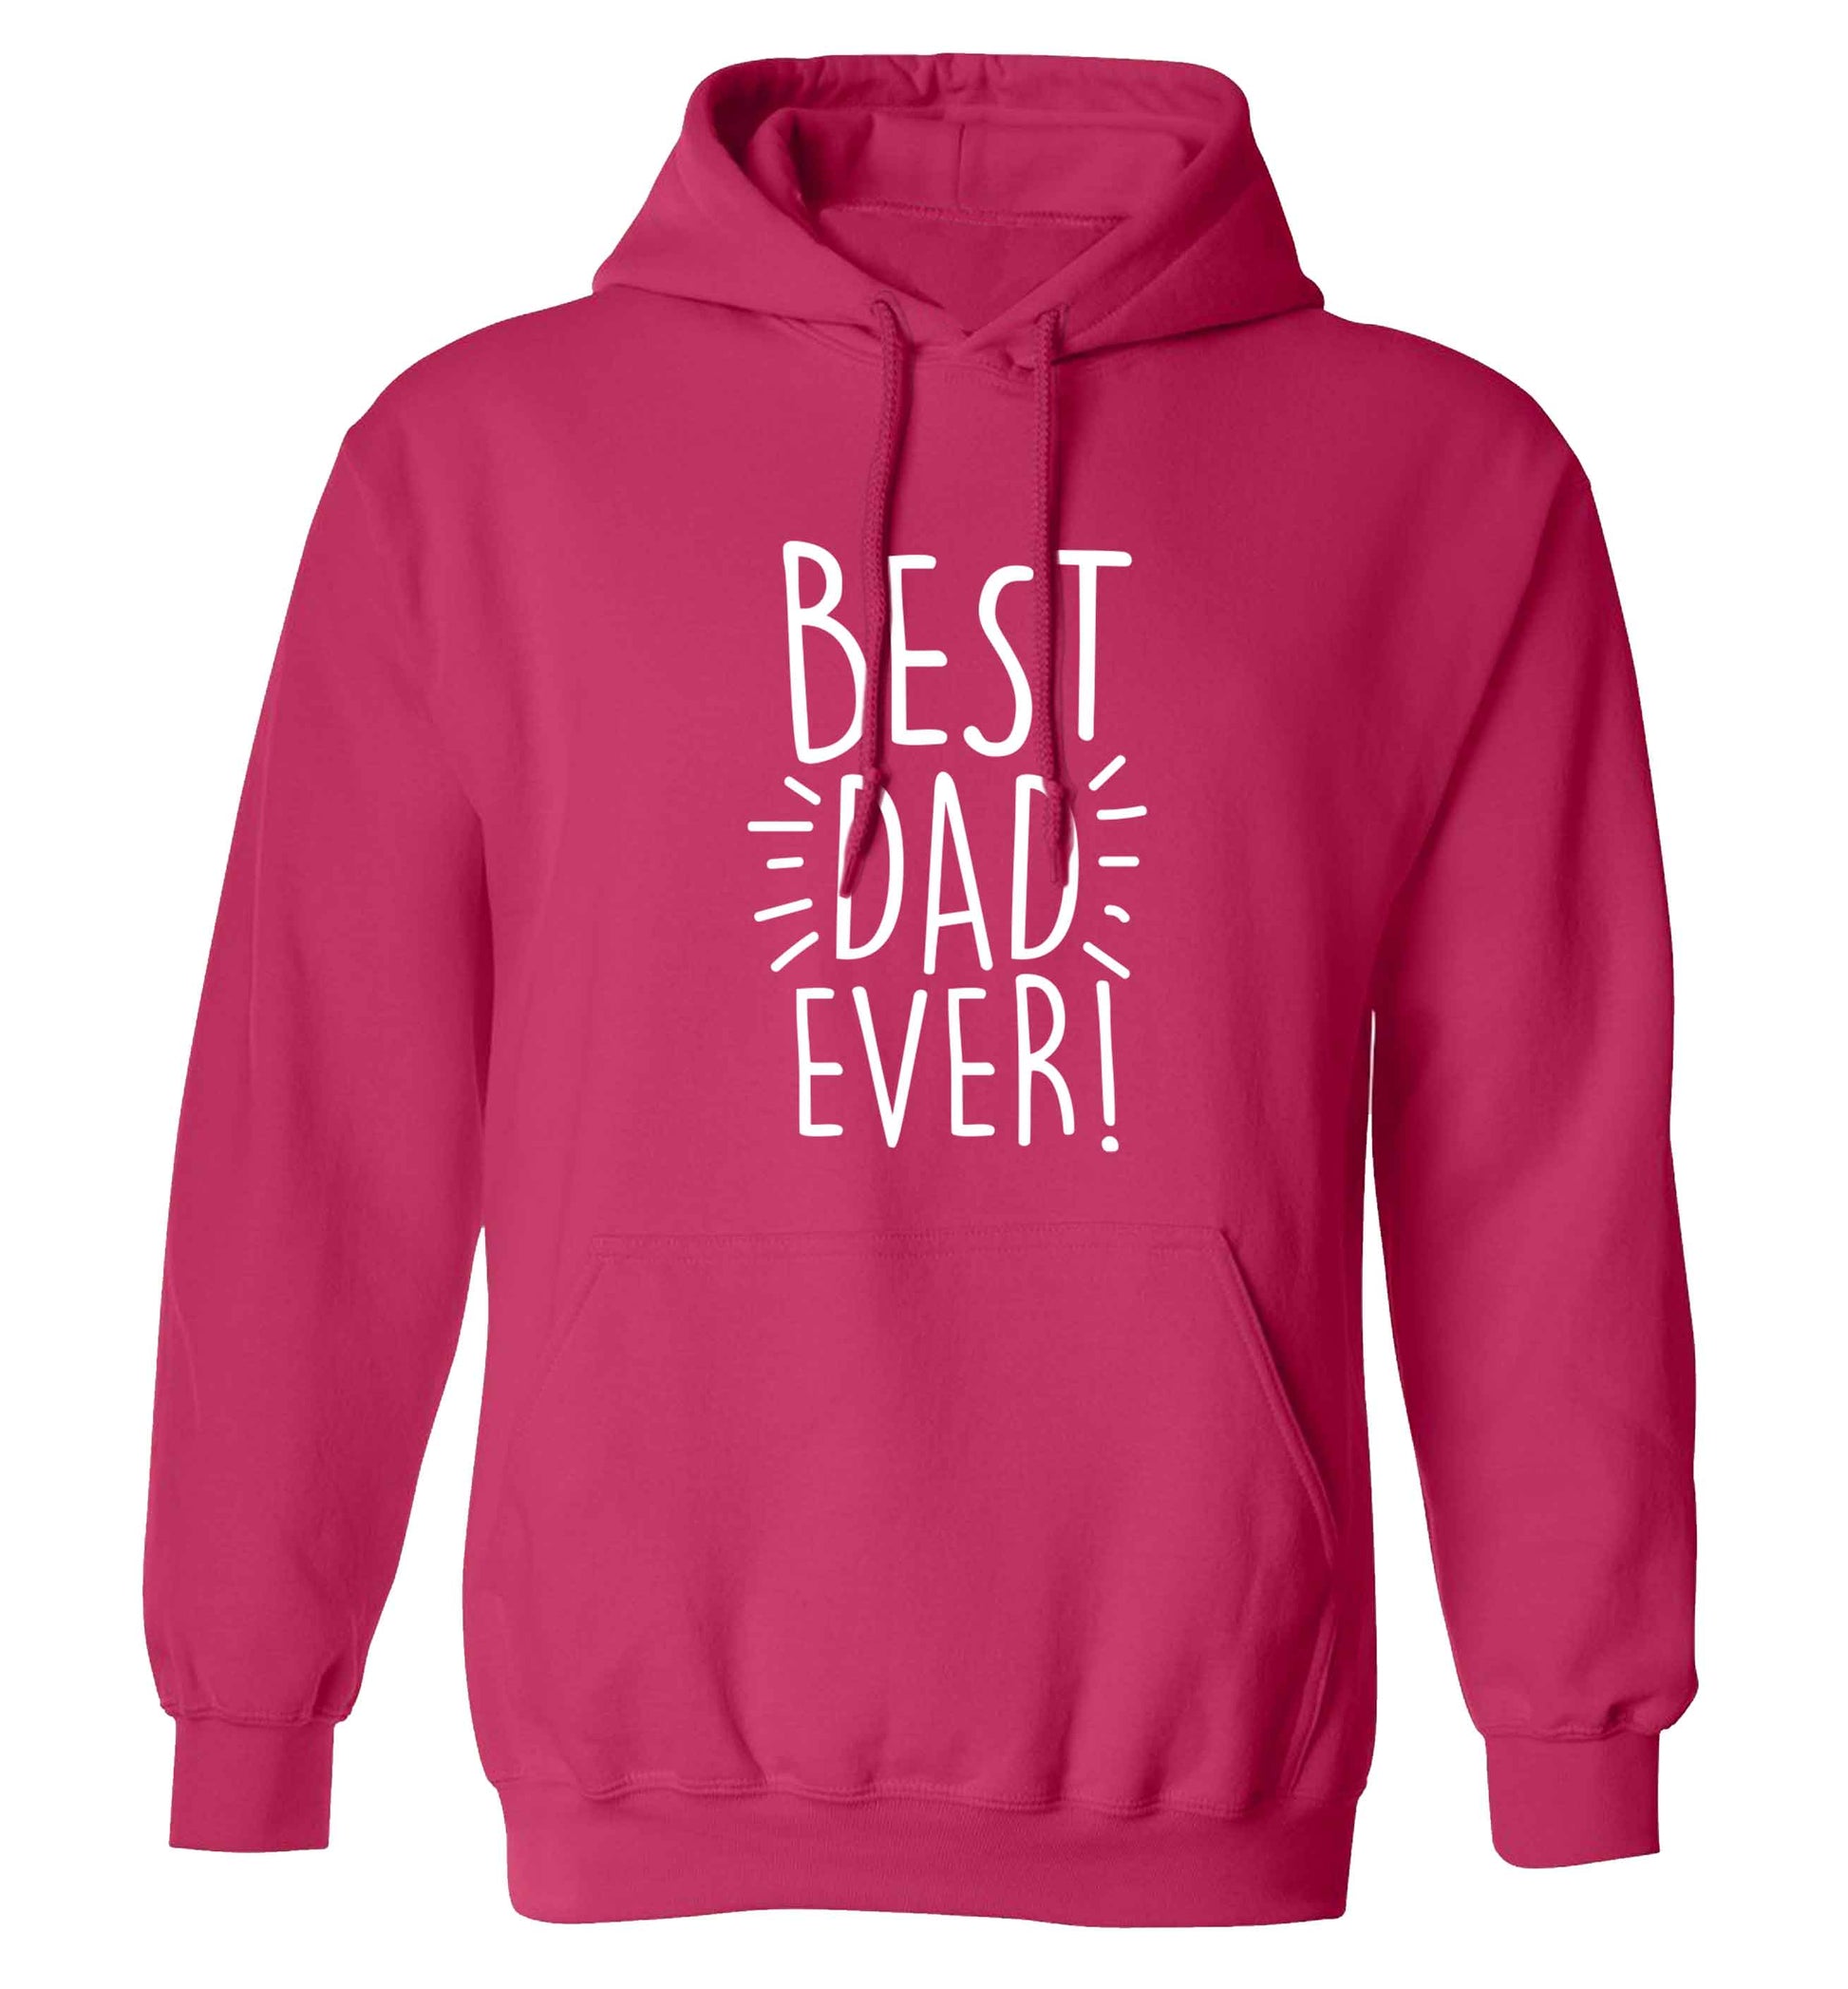 Best dad ever! adults unisex pink hoodie 2XL